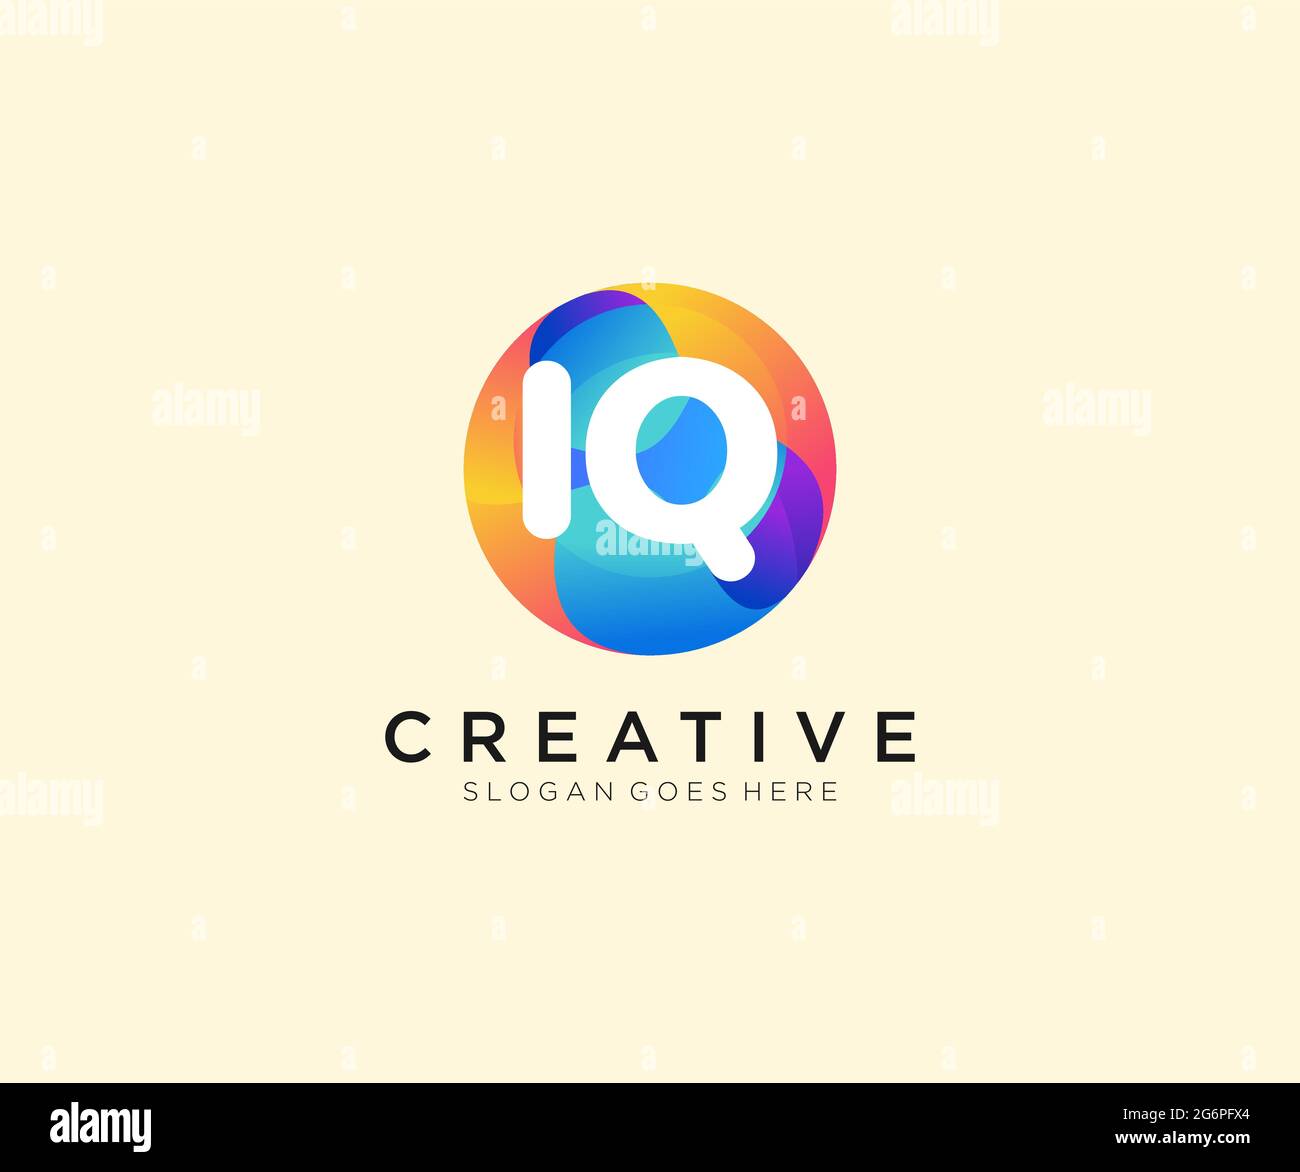 IQ initial logo With Colorful Circle template Stock Vector